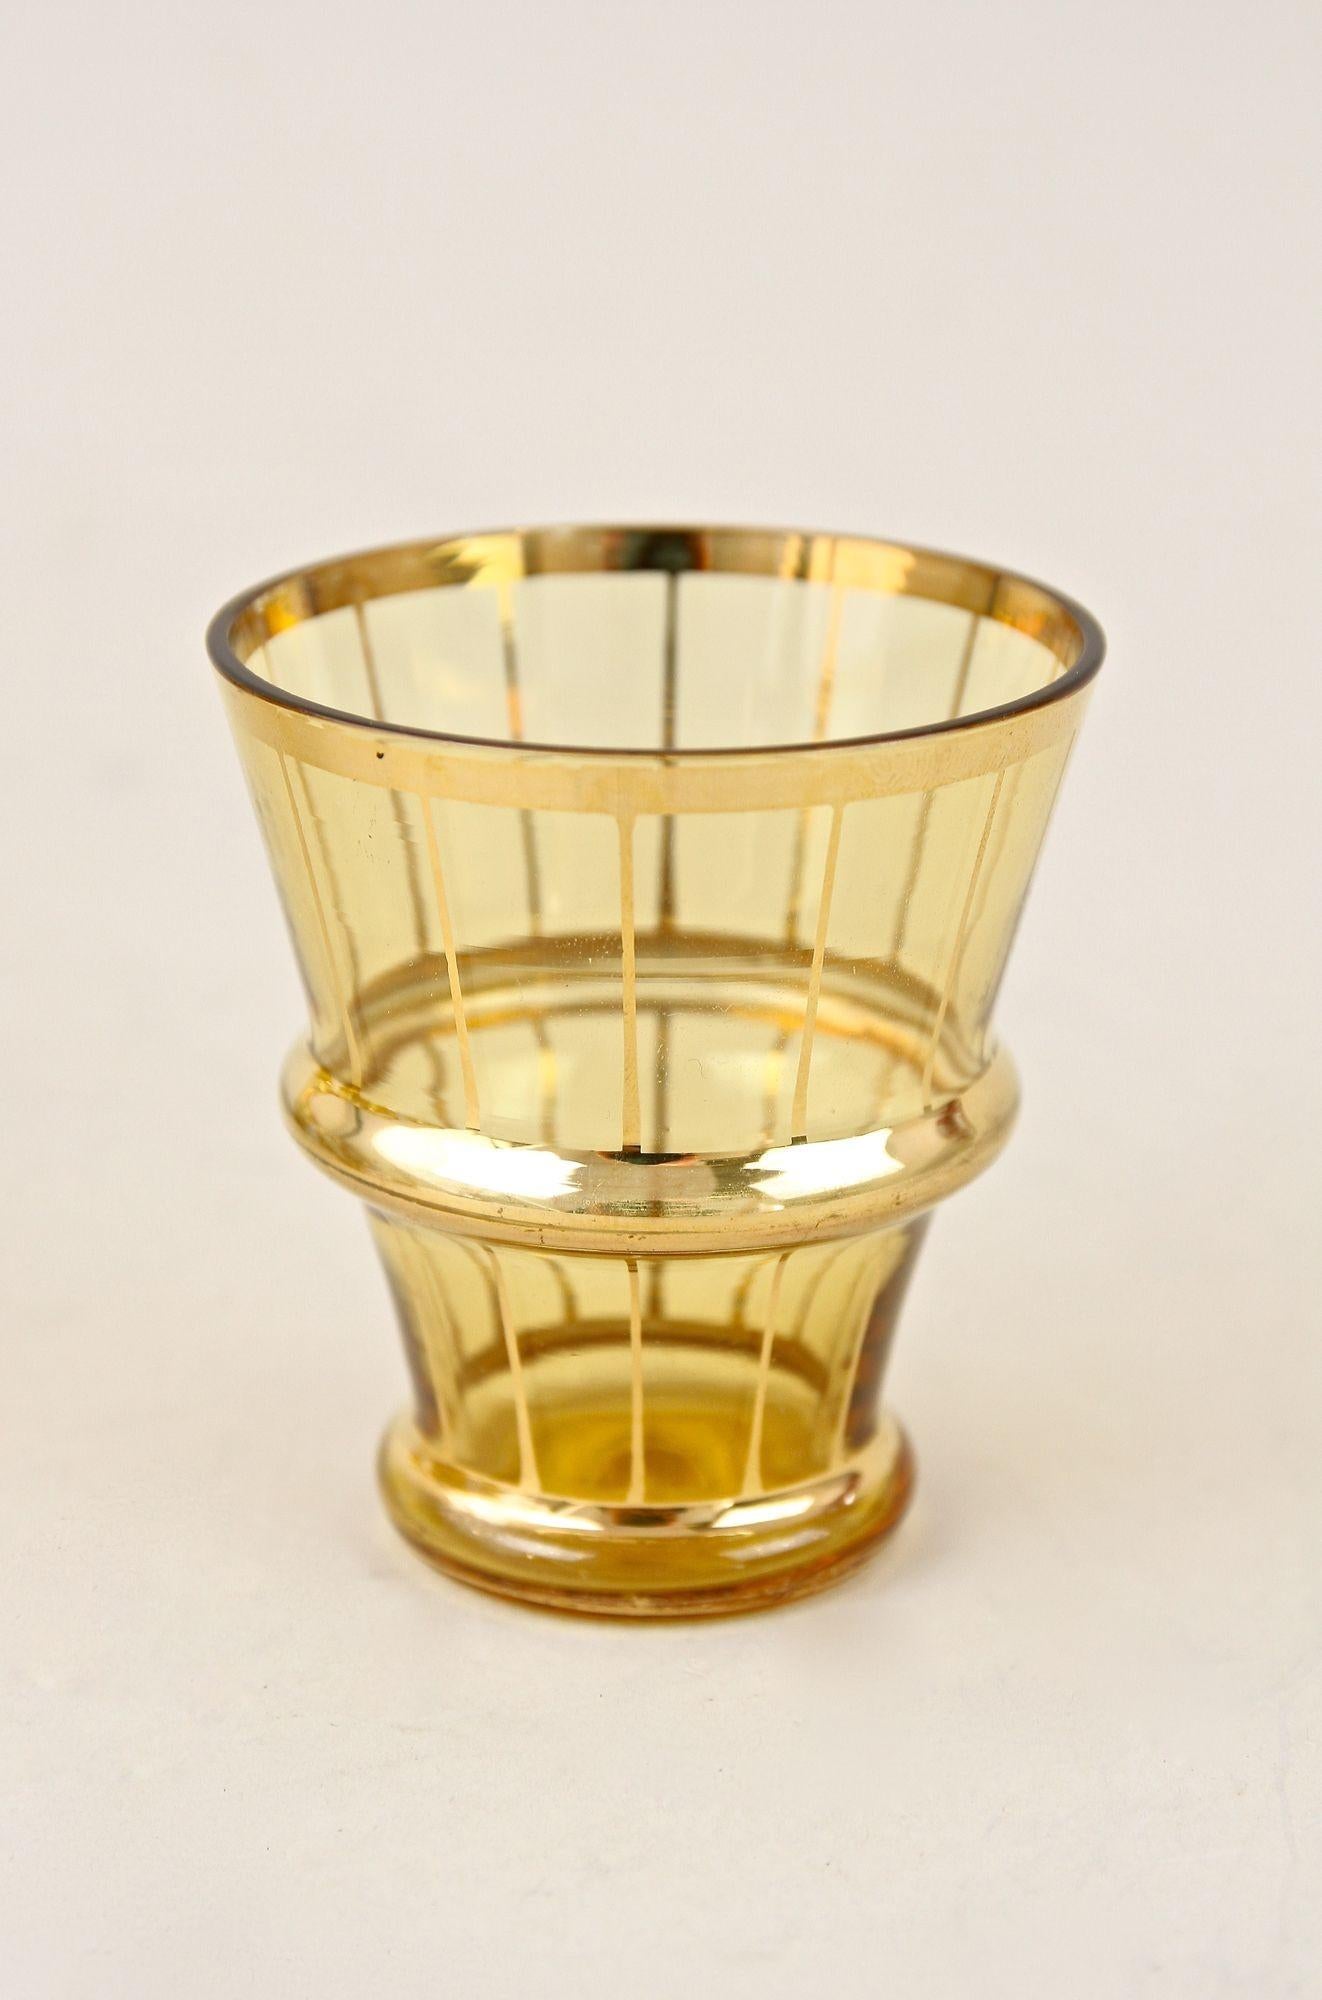 Amber Colored Gilt Art Deco Glass Decanter Set with 6 Shot Glasses, CZ ca. 1920 For Sale 11